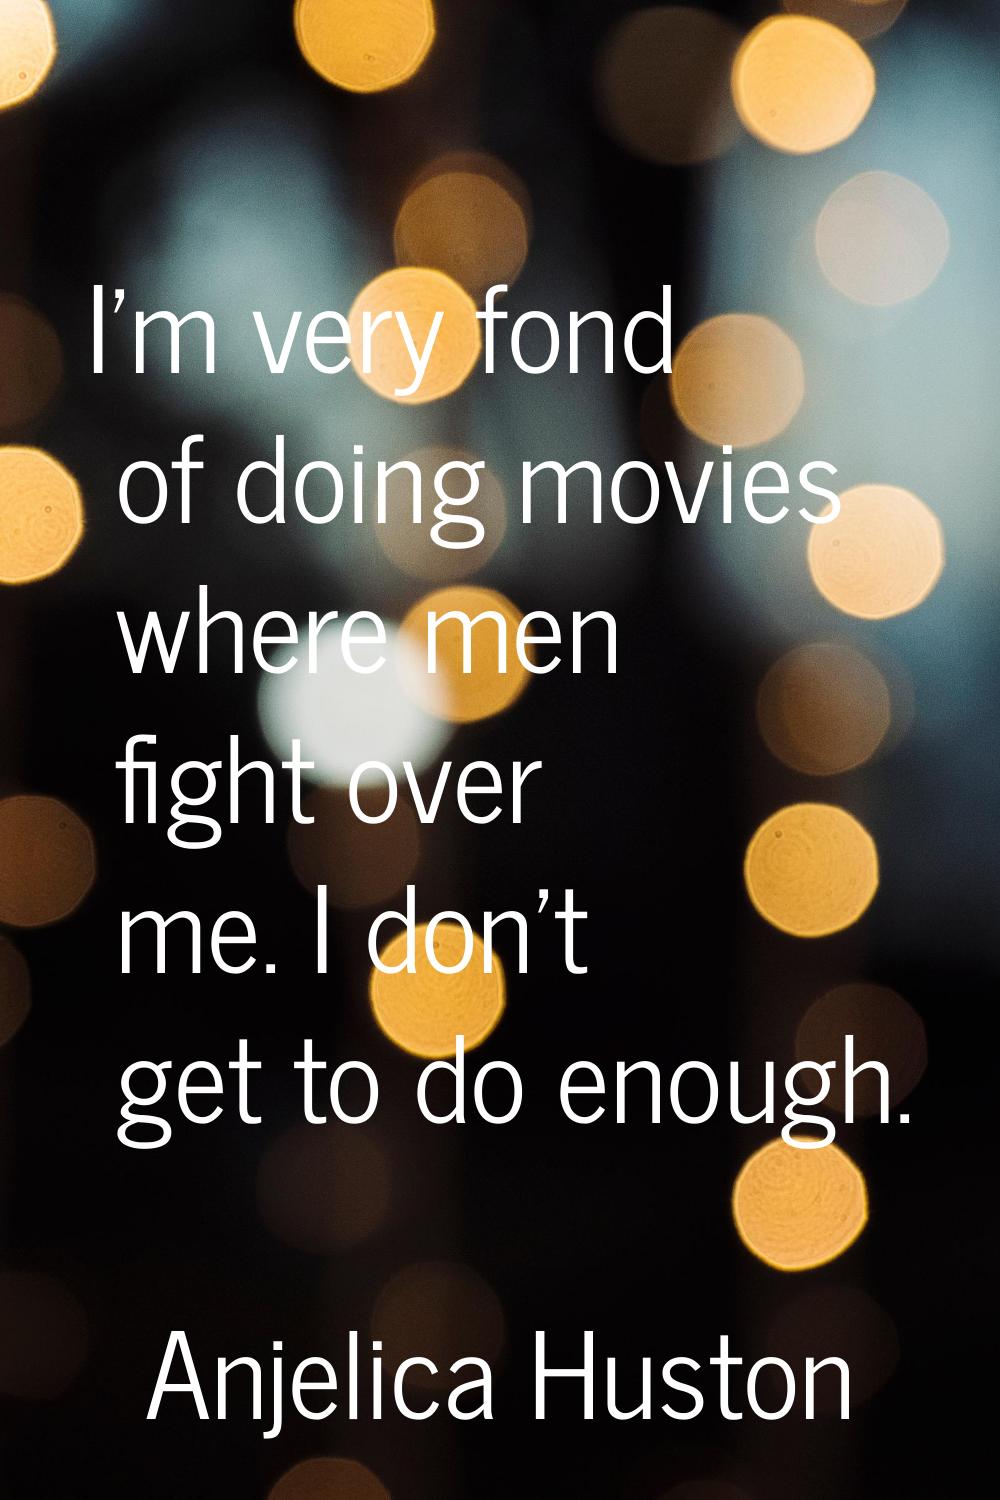 I'm very fond of doing movies where men fight over me. I don't get to do enough.